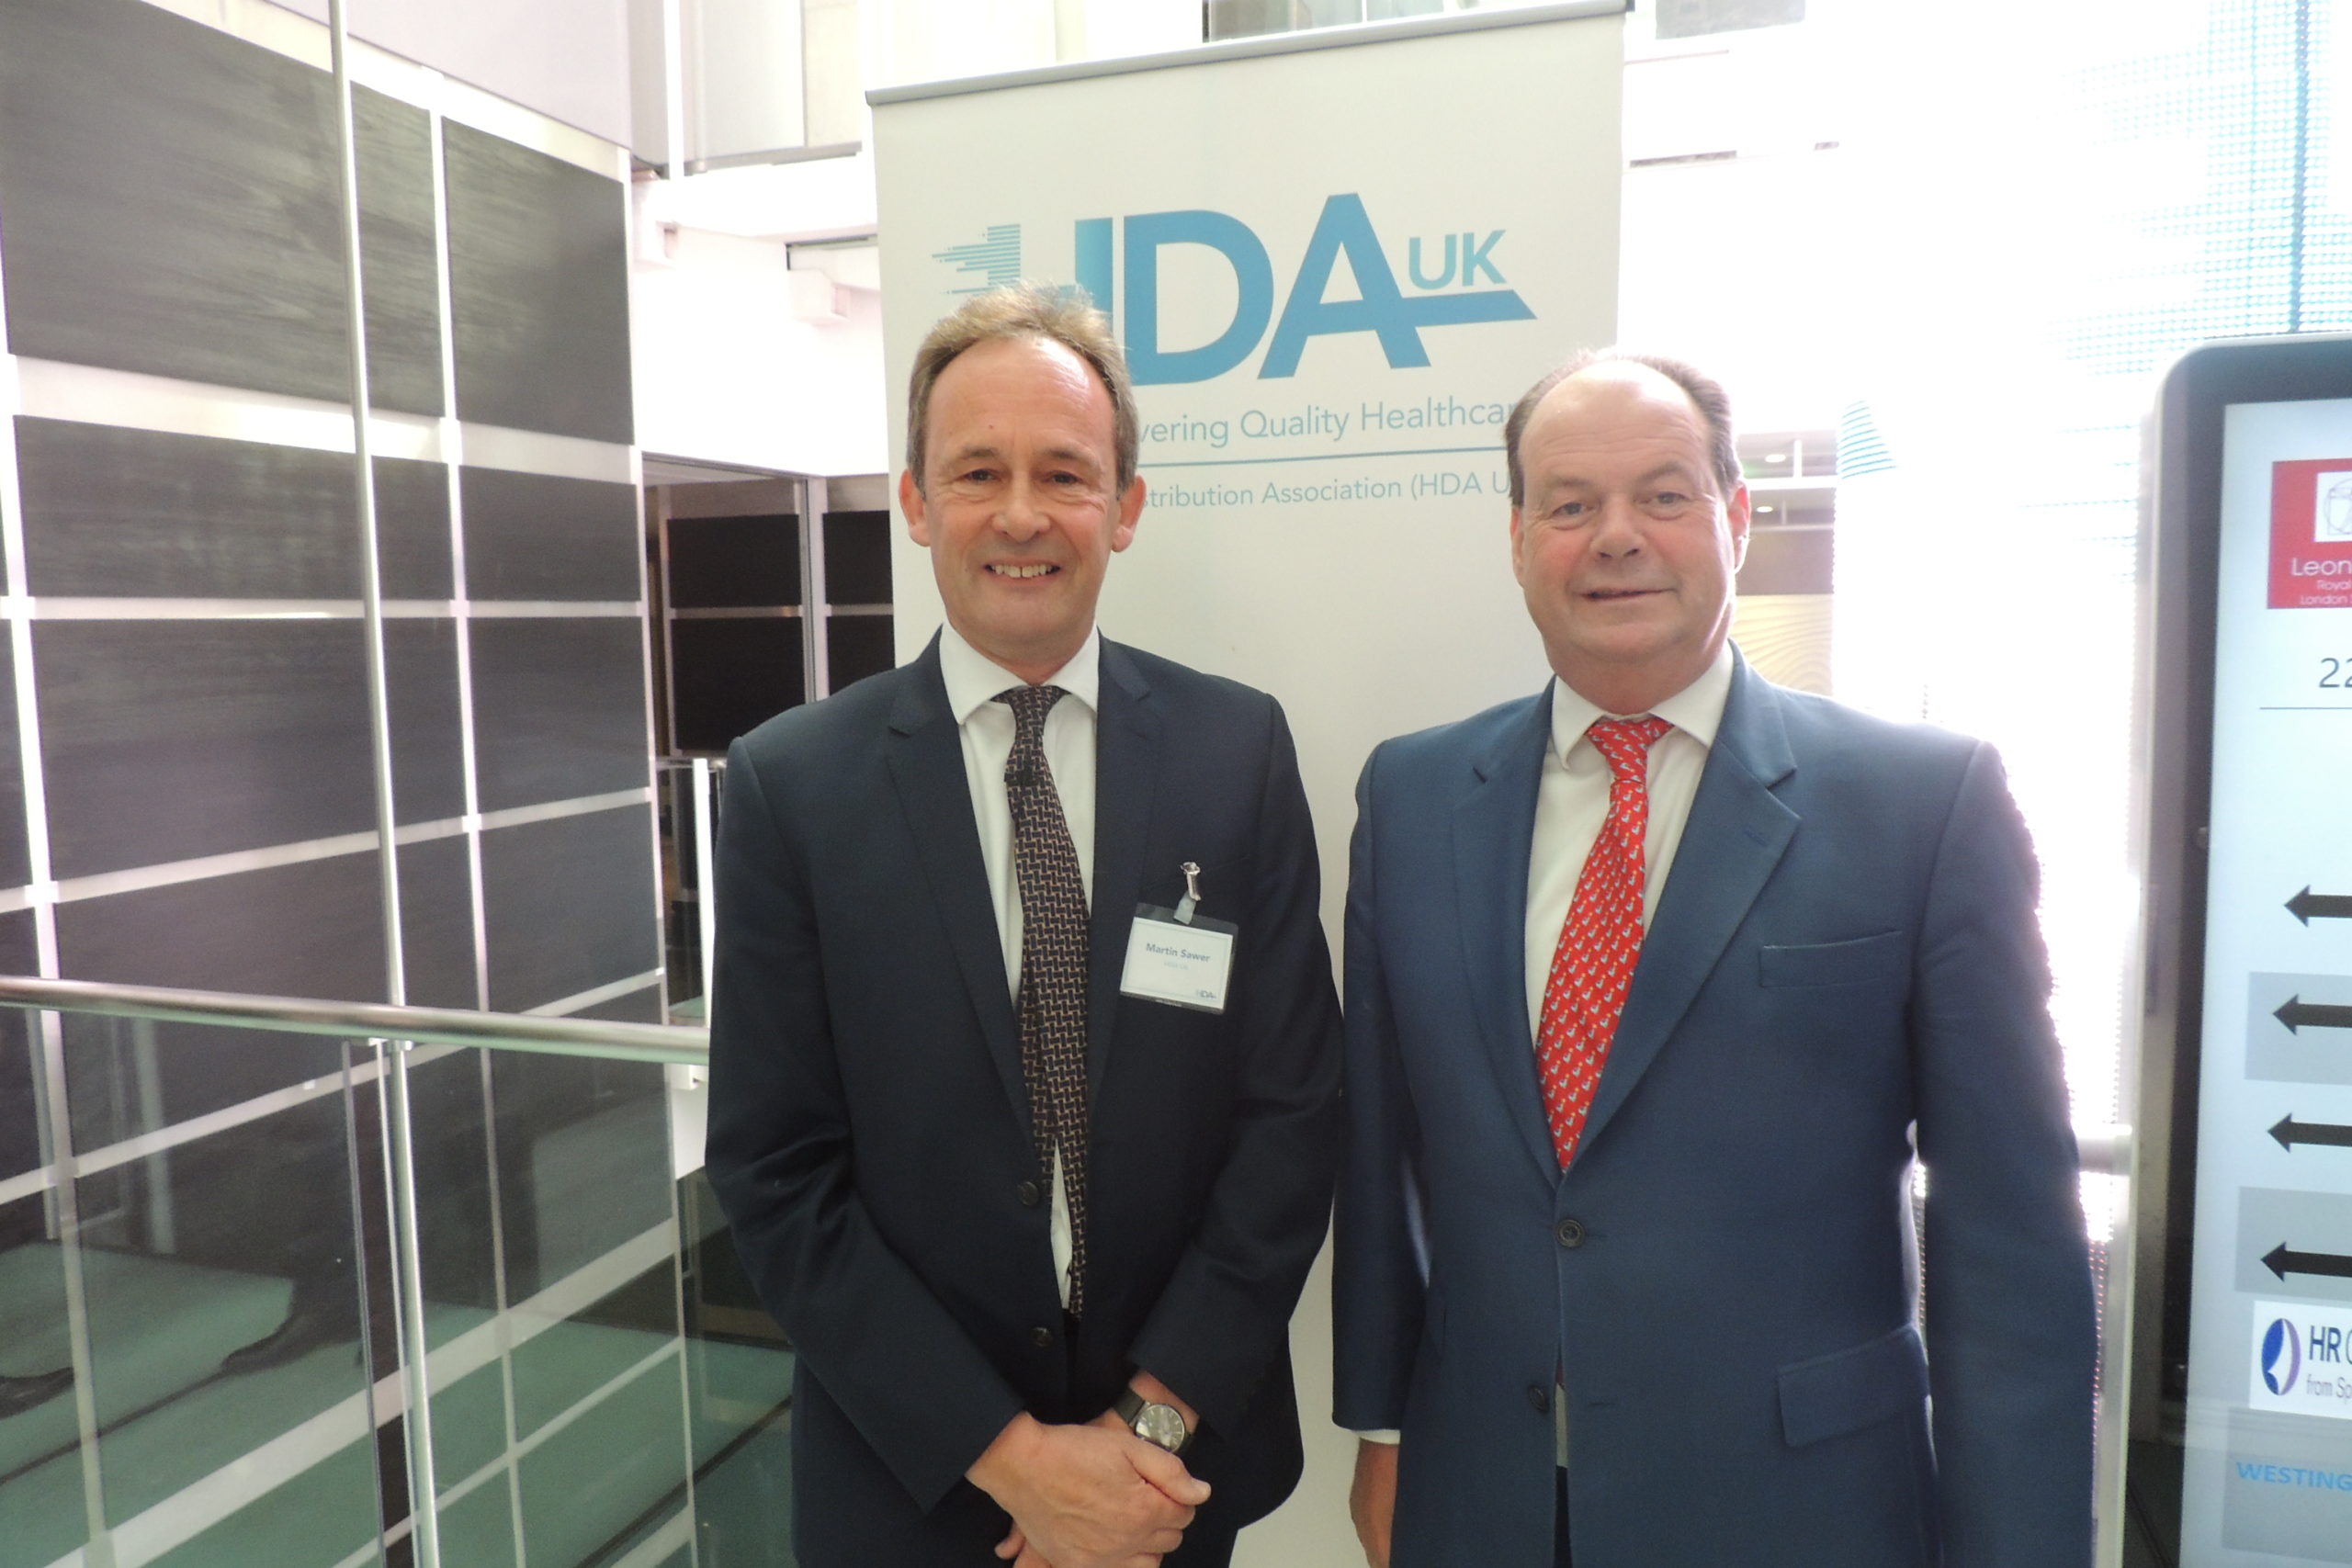 HDA Annual Conference, Leonardo Royal Hotel St Paul’s – Martin Sawer, HDA Executive Director & Stephen Hammond MP, Minister of State for Health